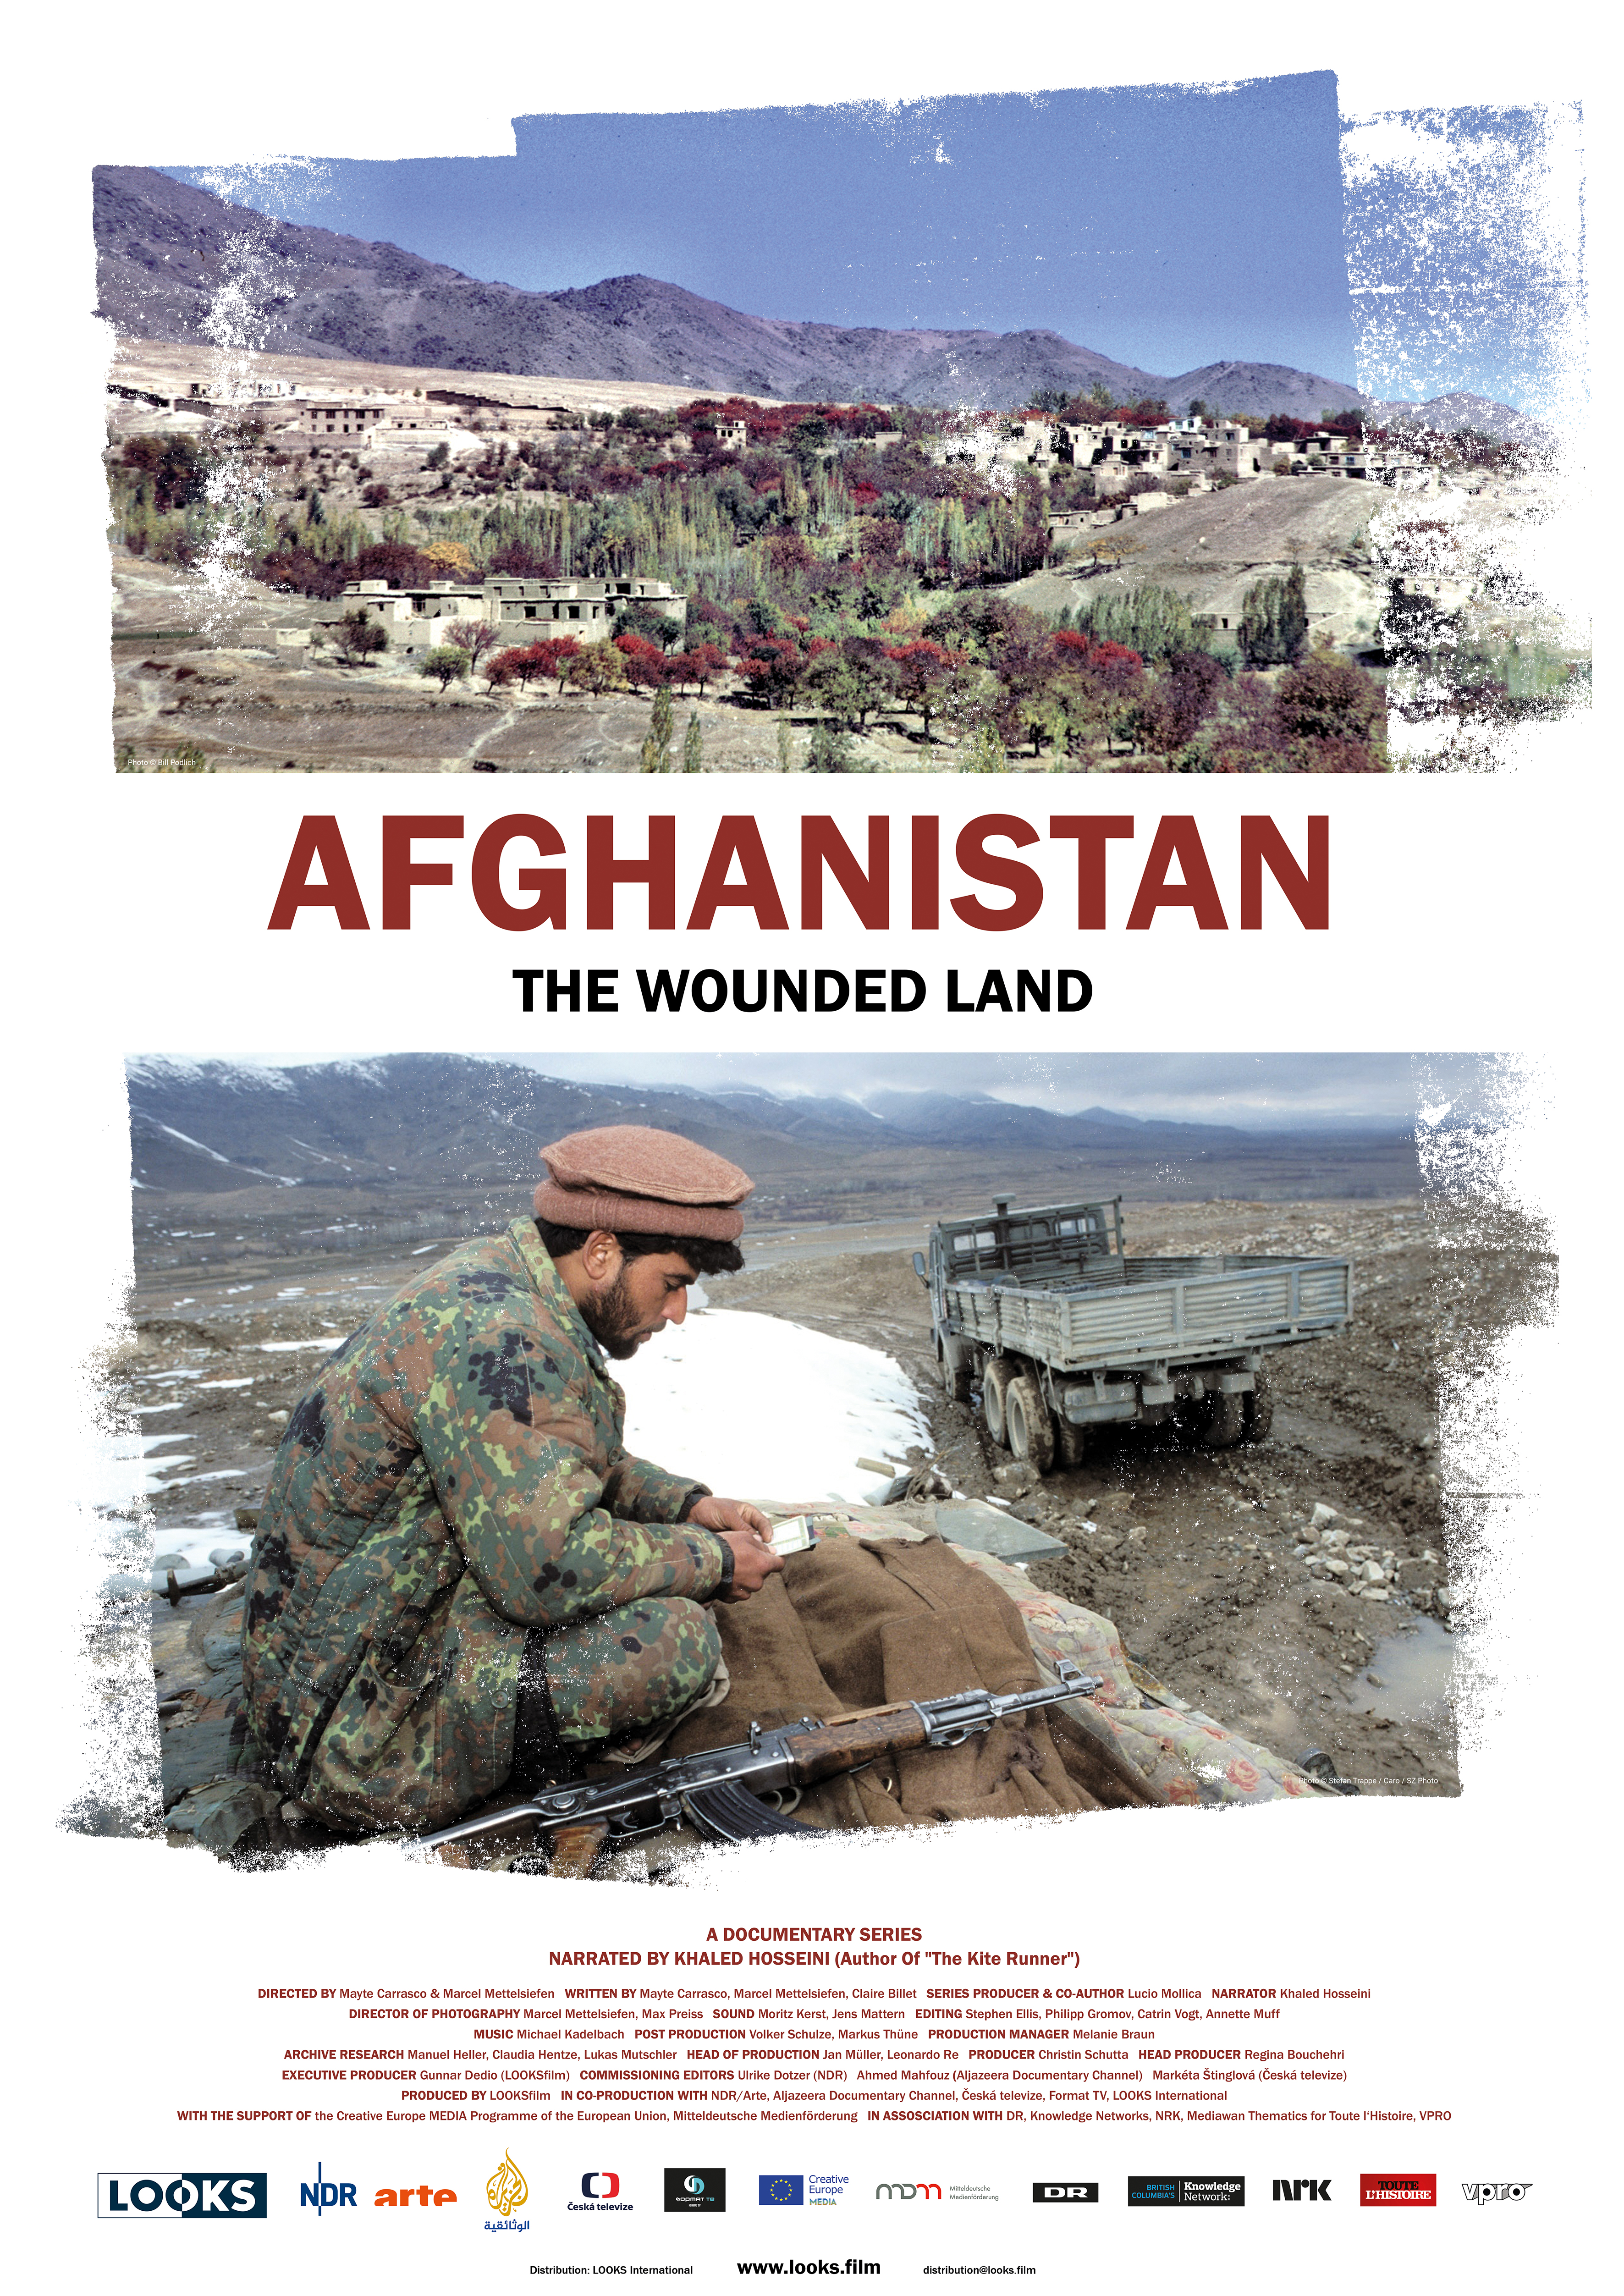 Afghanistan: The Wounded Land